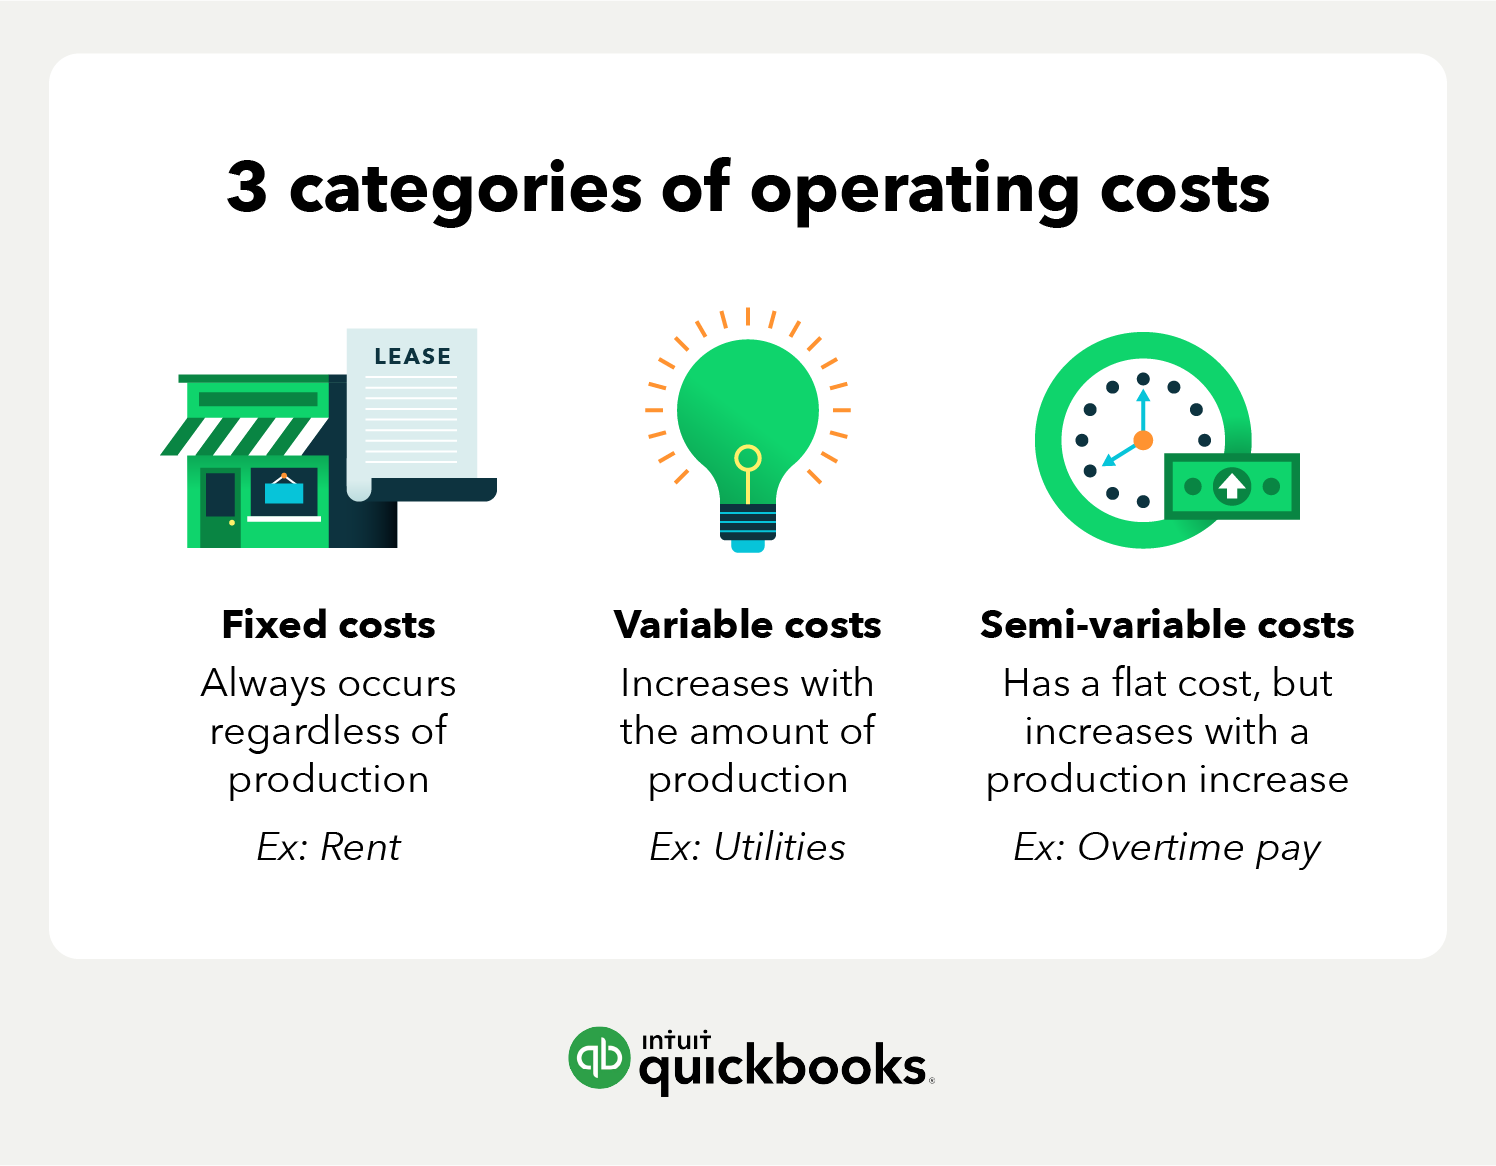 Three types of operating costs: fixed costs, variable costs, semi-variable costs.